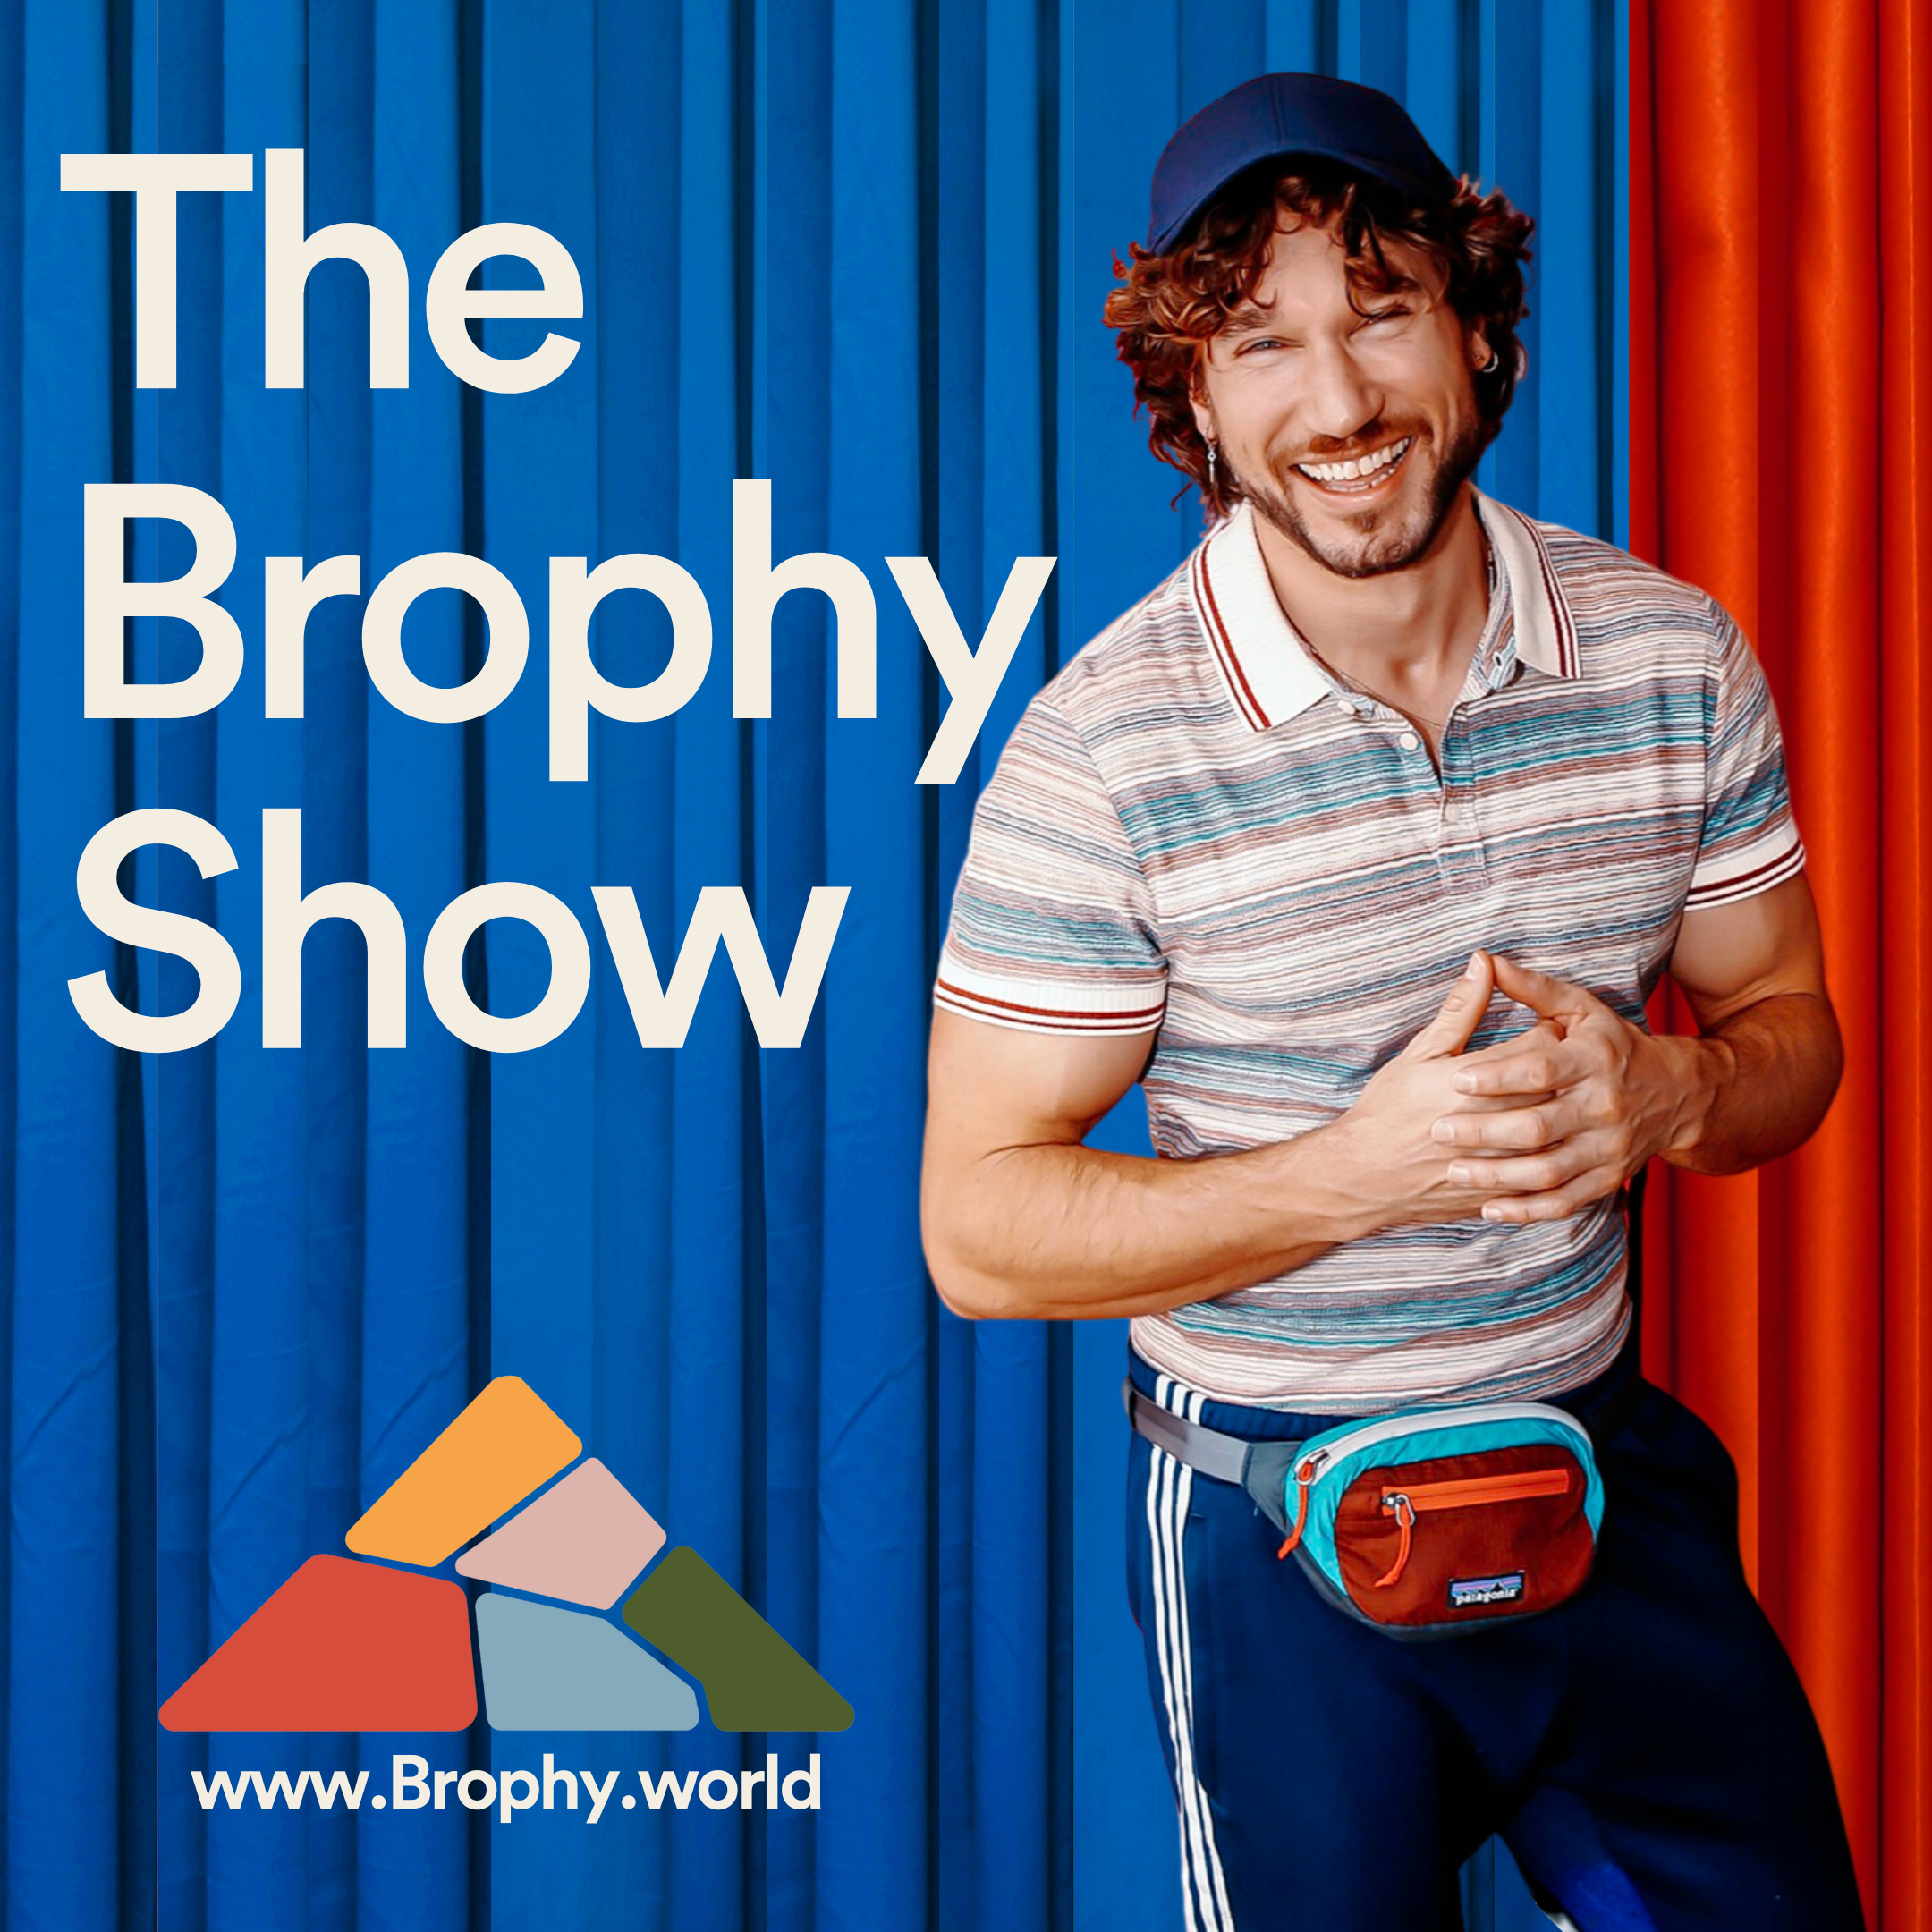 The Brophy Show